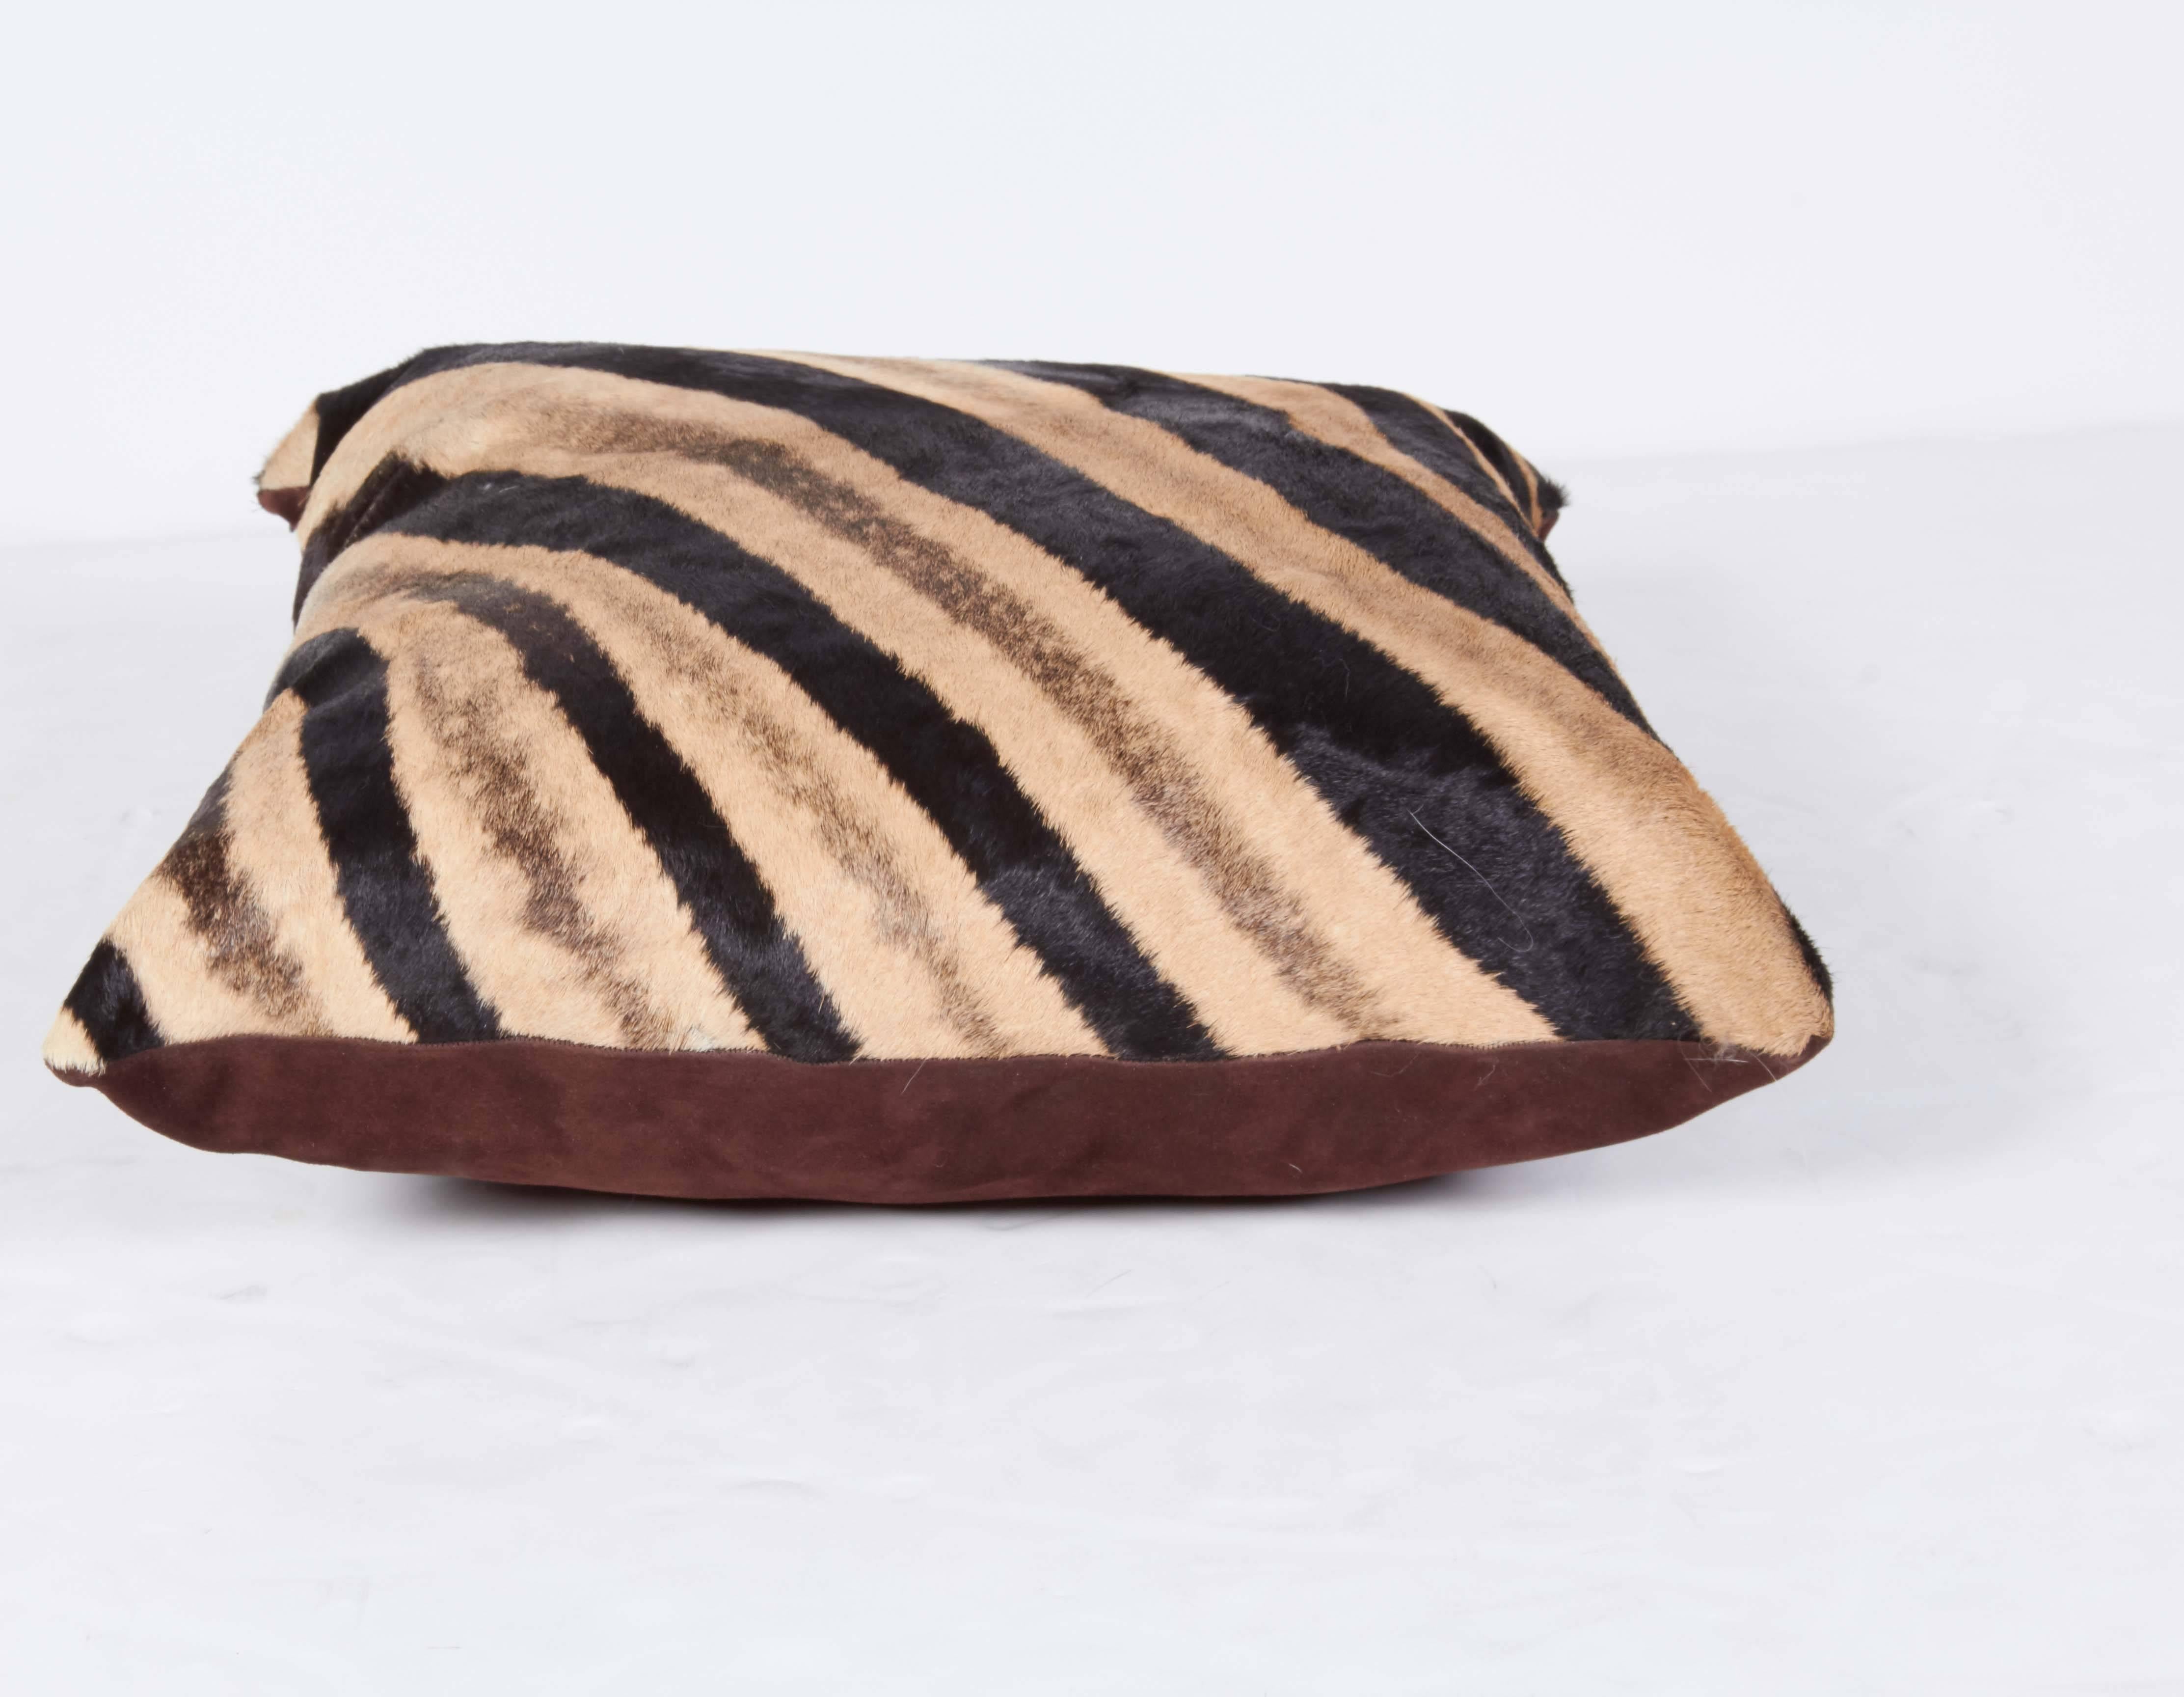 Hand-Crafted Pillow, Zebra